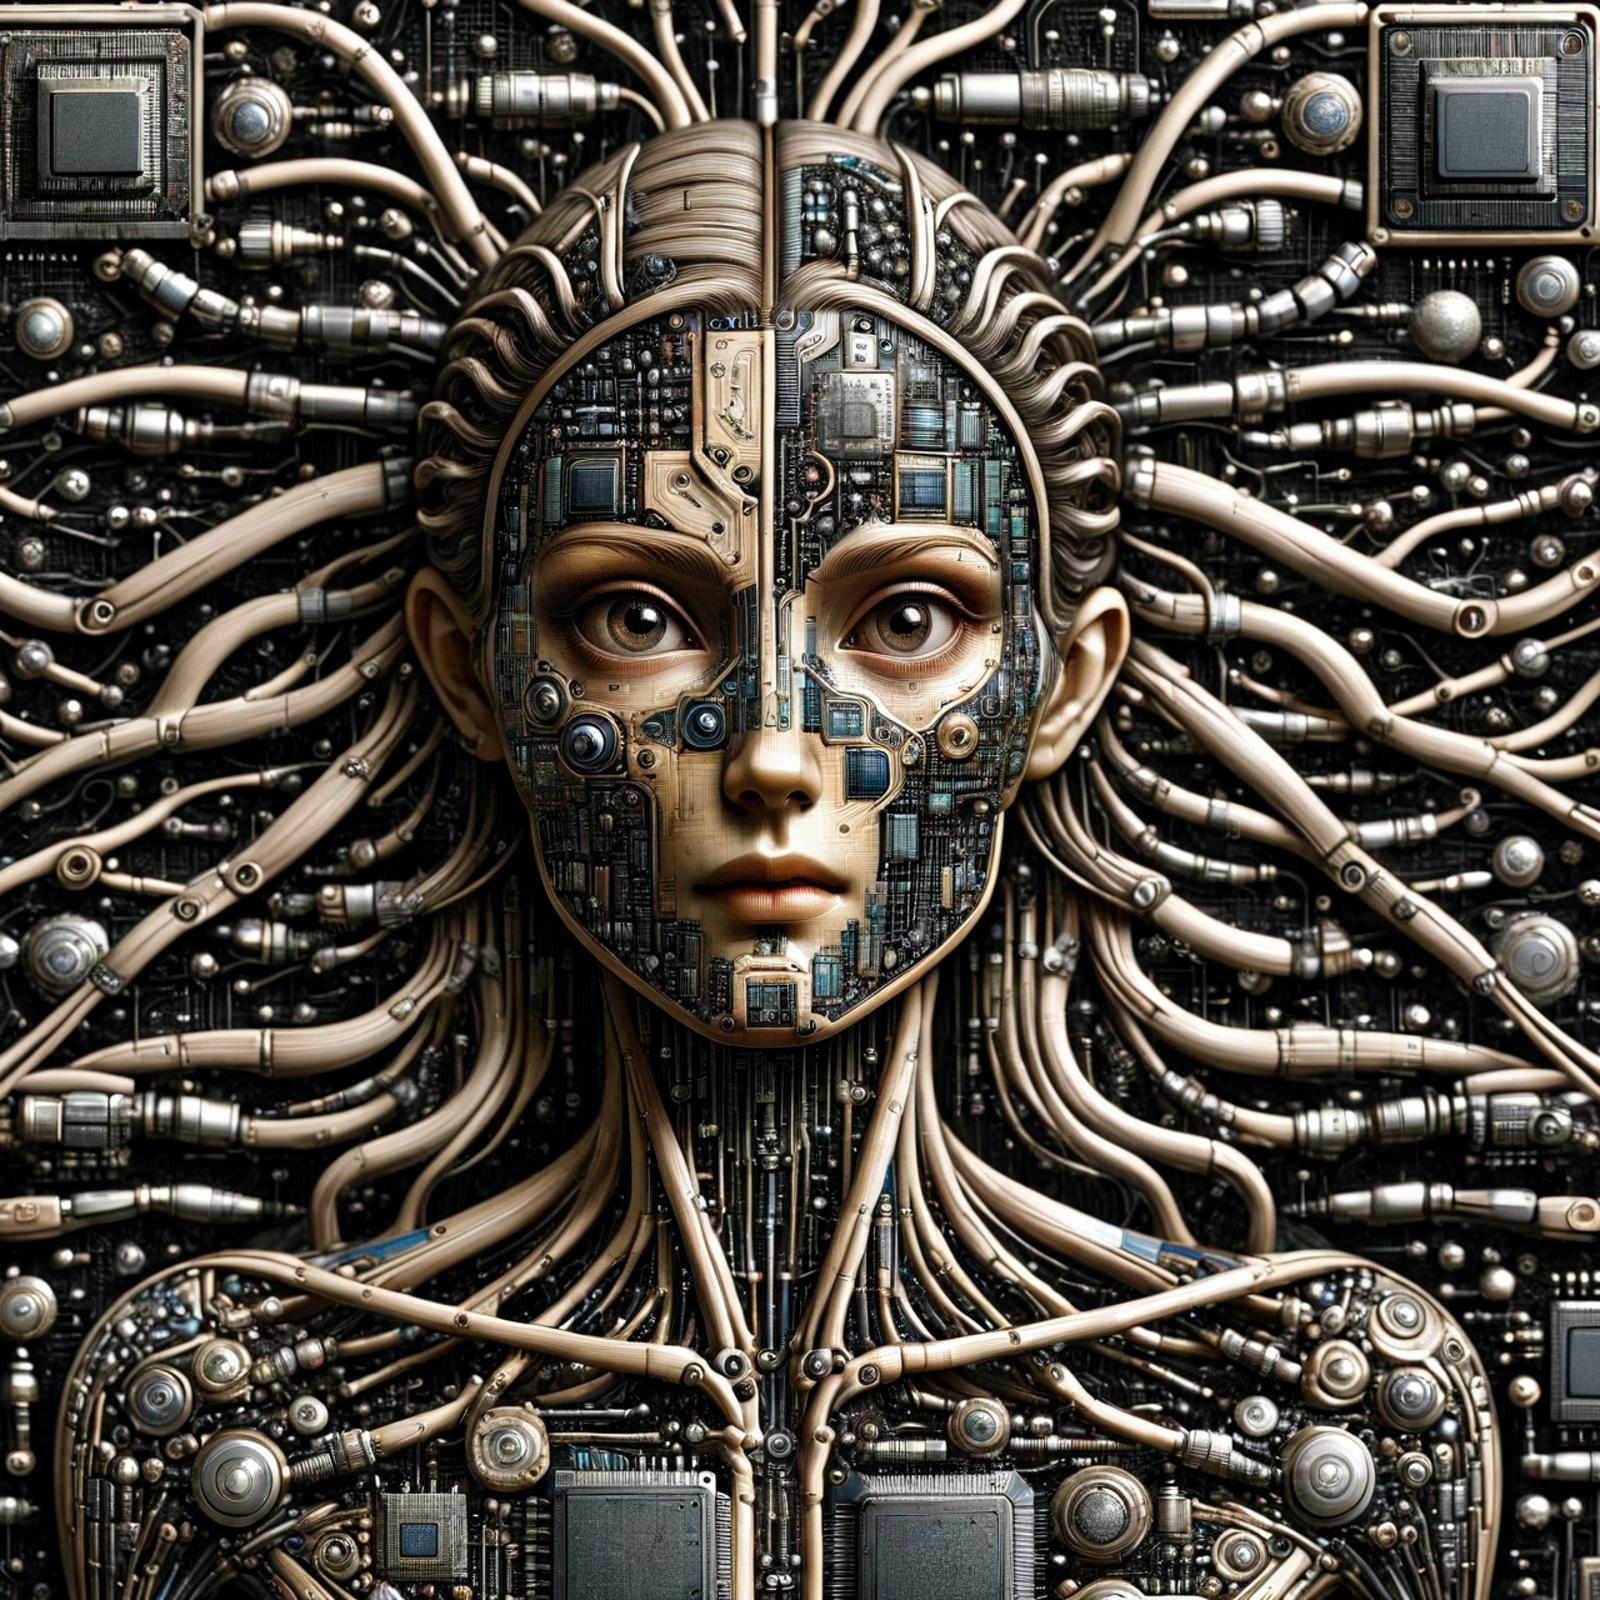 A 3D model of a woman's face with intricate wires and circuits attached to it.